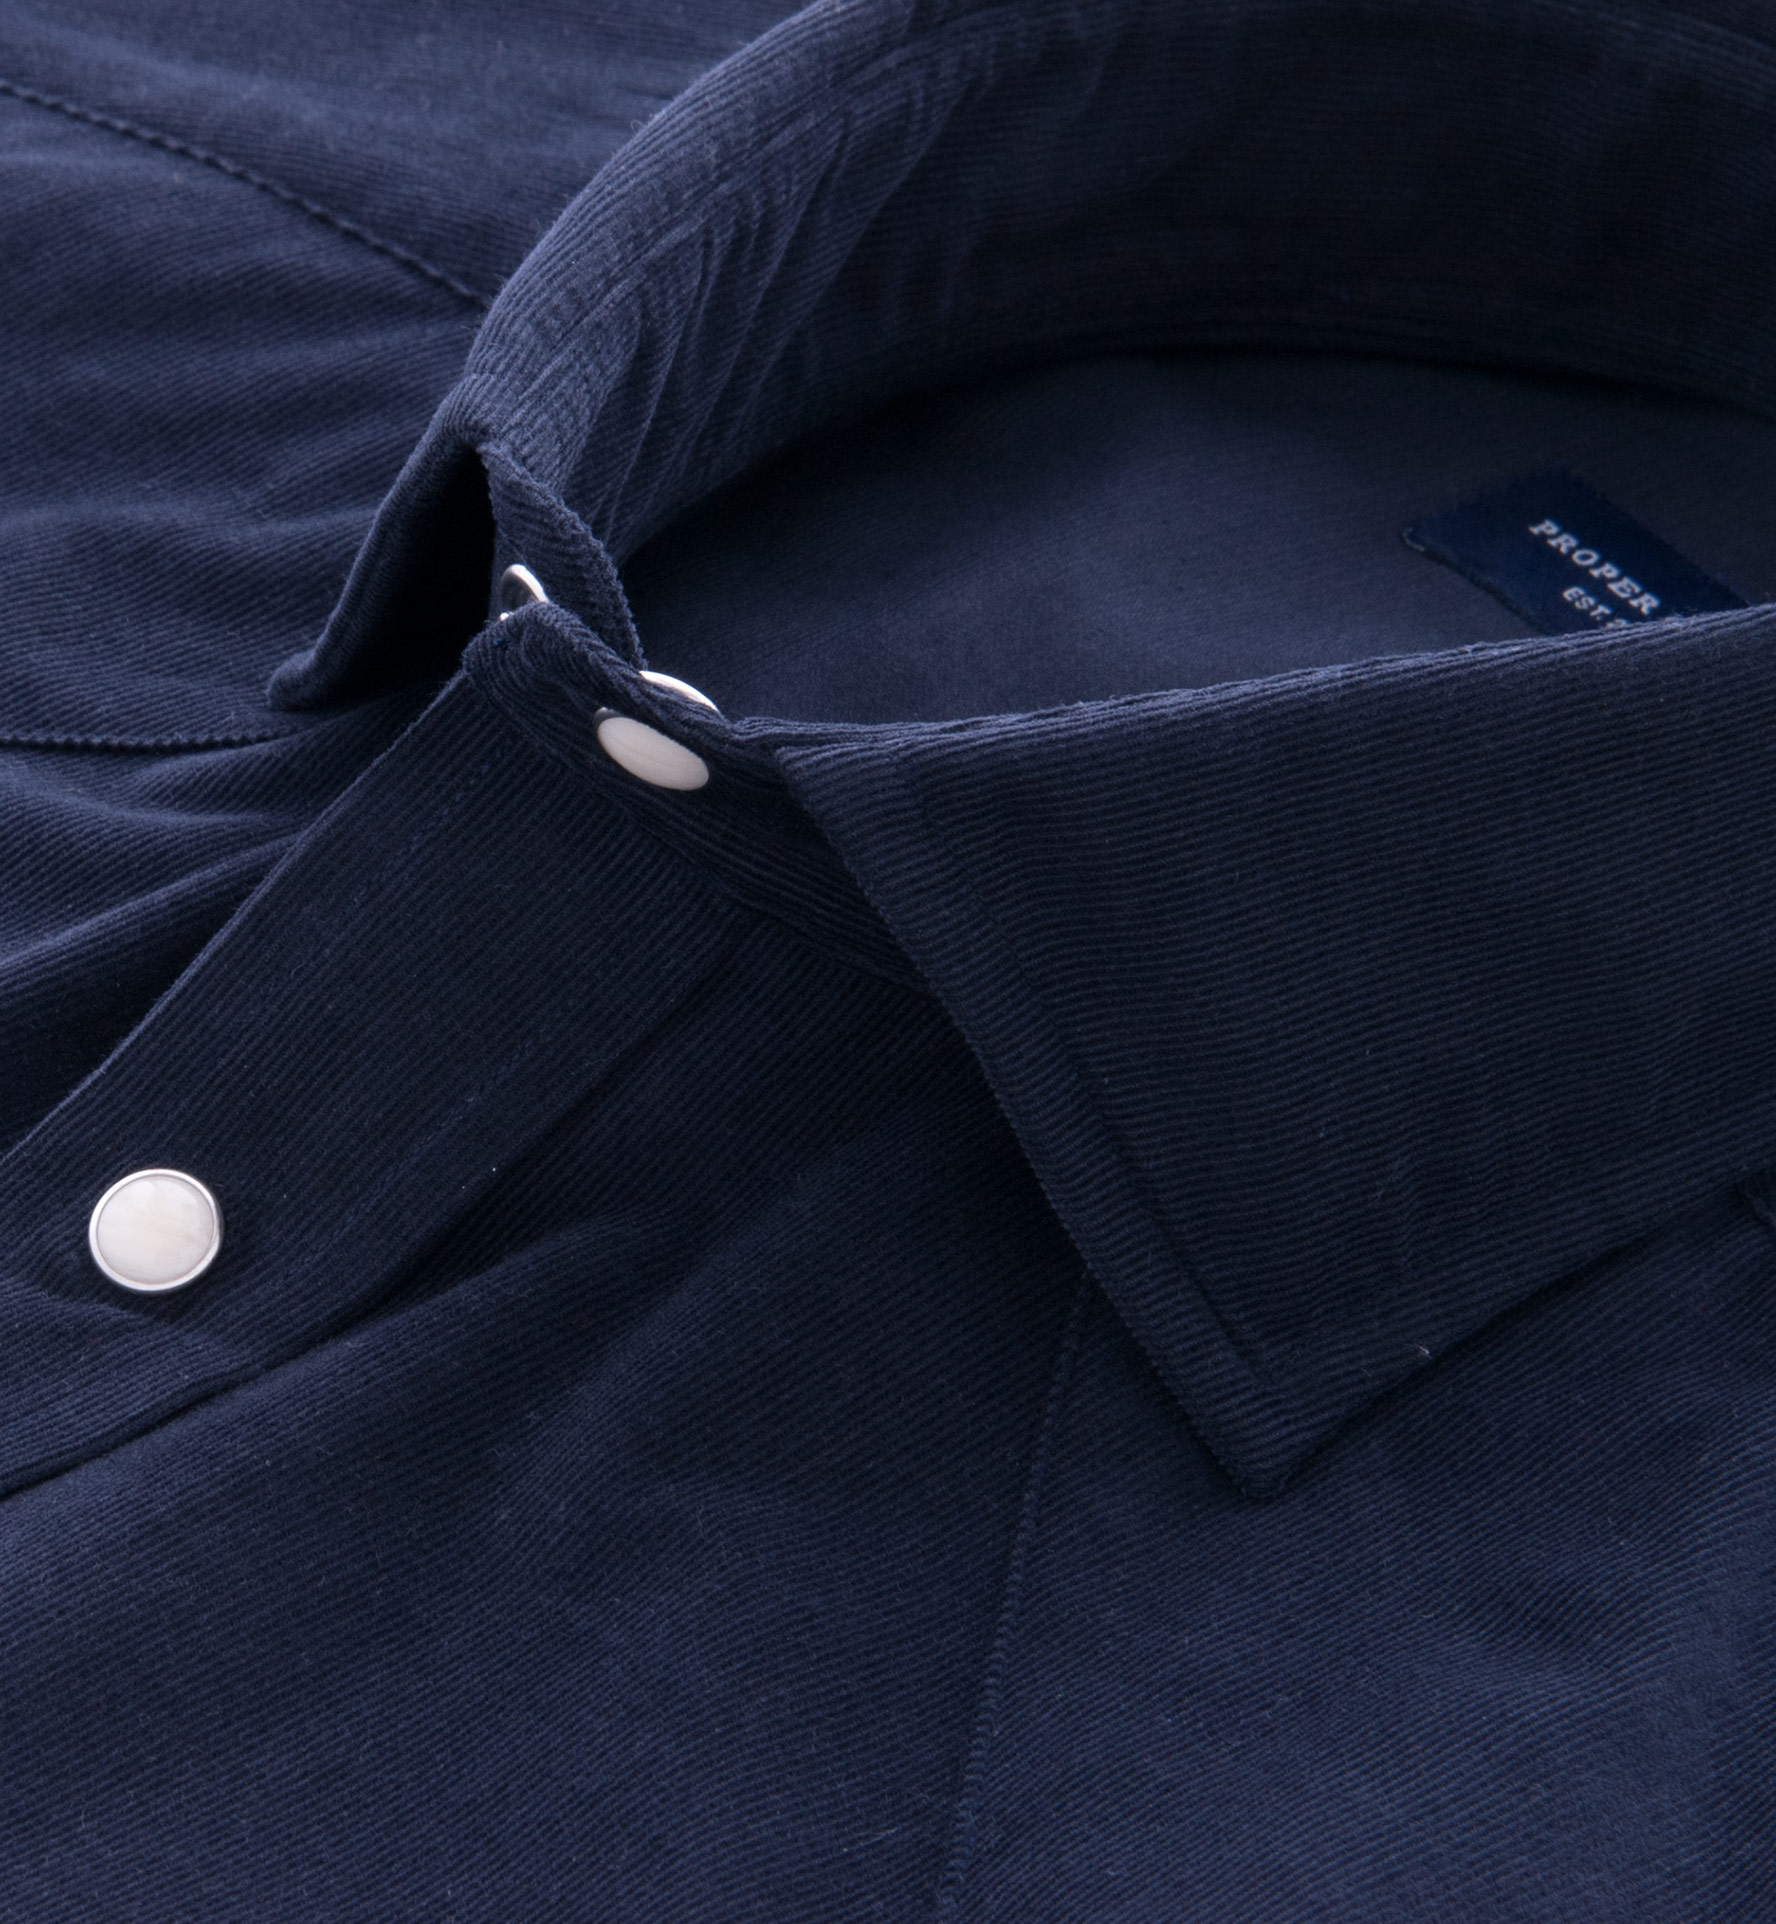 Albini Navy Fine Corduroy Tailor Made Shirt by Proper Cloth